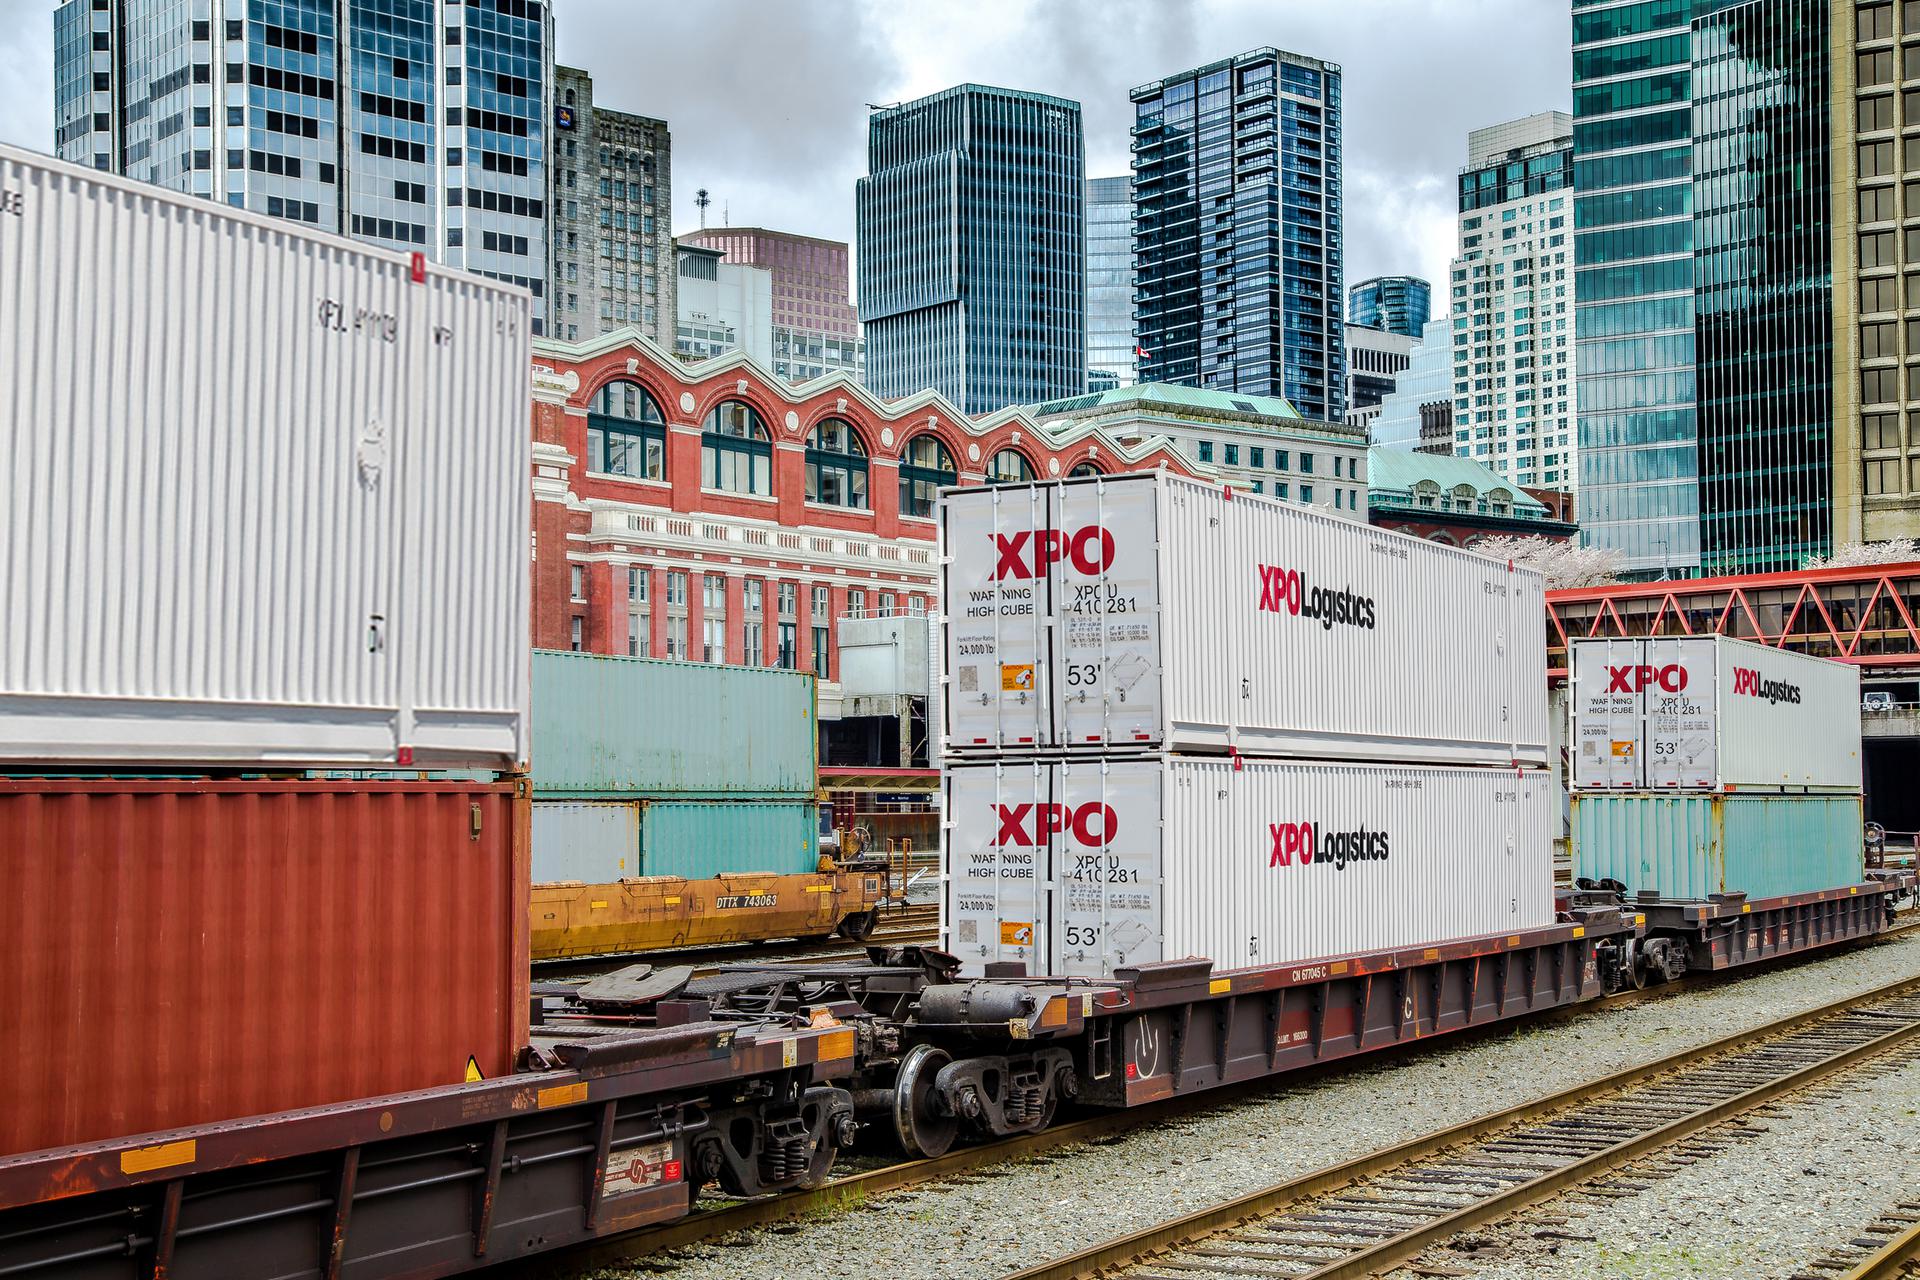 XPO Logistics containers on train with city skyline in background